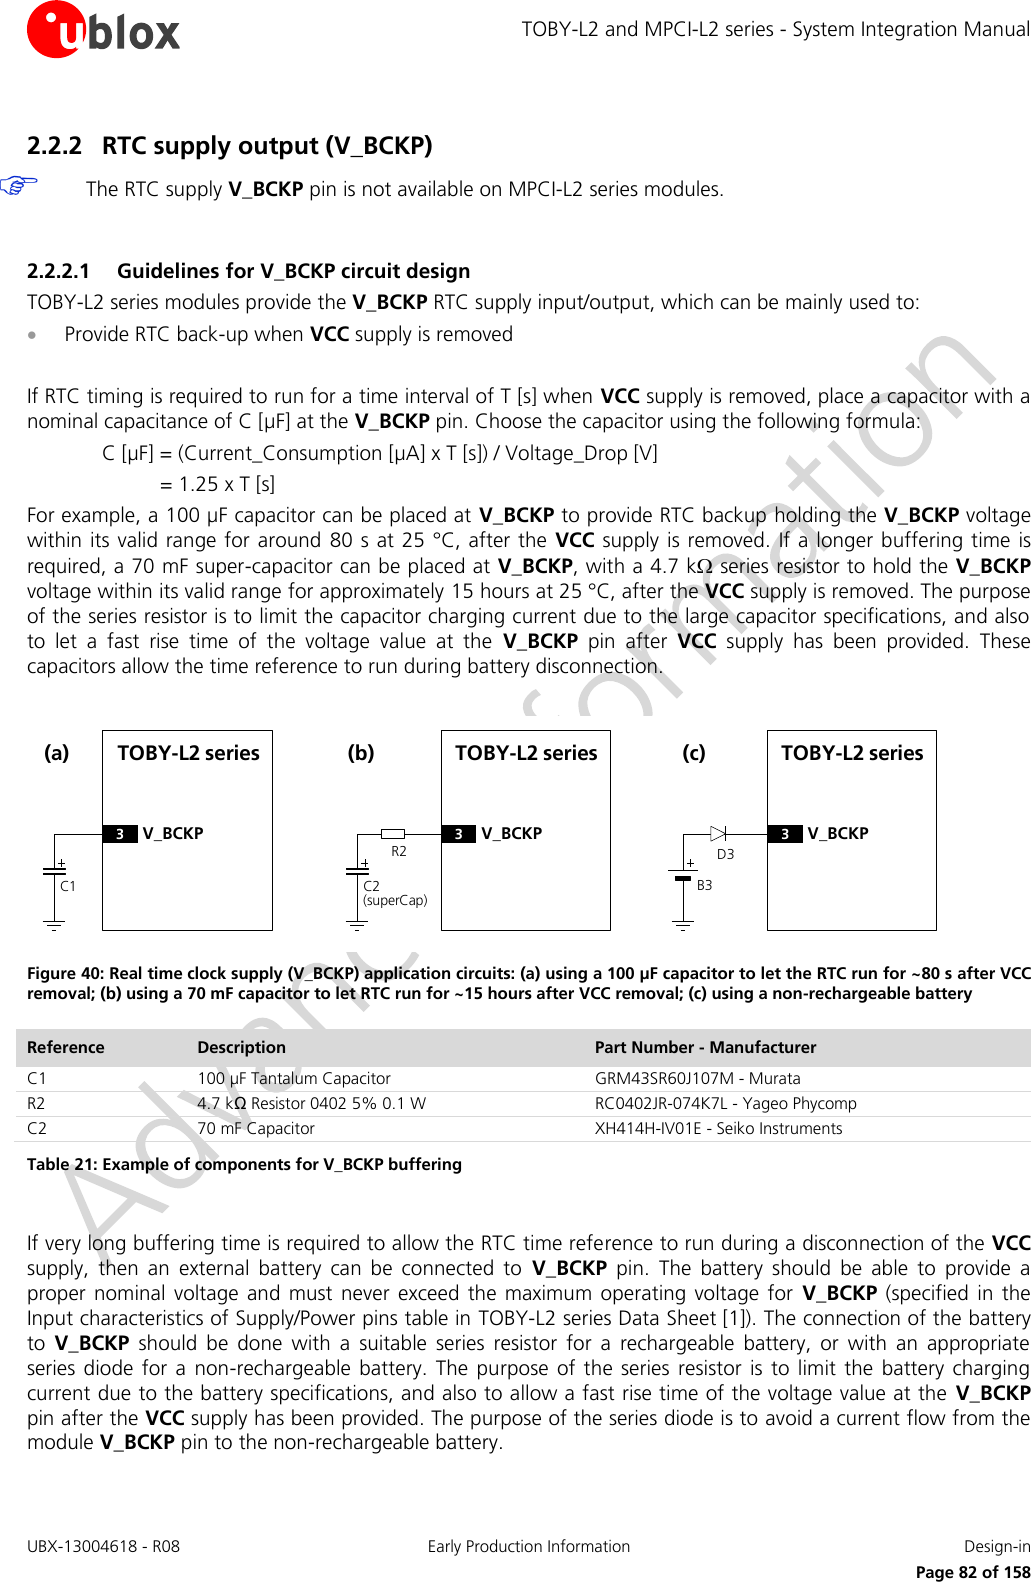 TOBY-L2 and MPCI-L2 series - System Integration Manual UBX-13004618 - R08  Early Production Information  Design-in     Page 82 of 158 2.2.2 RTC supply output (V_BCKP)  The RTC supply V_BCKP pin is not available on MPCI-L2 series modules.  2.2.2.1 Guidelines for V_BCKP circuit design TOBY-L2 series modules provide the V_BCKP RTC supply input/output, which can be mainly used to:   Provide RTC back-up when VCC supply is removed  If RTC timing is required to run for a time interval of T [s] when VCC supply is removed, place a capacitor with a nominal capacitance of C [µF] at the V_BCKP pin. Choose the capacitor using the following formula: C [µF] = (Current_Consumption [µA] x T [s]) / Voltage_Drop [V] = 1.25 x T [s]  For example, a 100 µF capacitor can be placed at V_BCKP to provide RTC backup holding the V_BCKP voltage within its valid range for around  80 s at 25 °C, after the VCC supply is removed.  If a longer buffering time is required, a 70 mF super-capacitor can be placed at V_BCKP, with a 4.7 k series resistor to hold the V_BCKP voltage within its valid range for approximately 15 hours at 25 °C, after the VCC supply is removed. The purpose of the series resistor is to limit the capacitor charging current due to the large capacitor specifications, and also to  let  a  fast  rise  time  of  the  voltage  value  at  the  V_BCKP  pin  after  VCC  supply  has  been  provided.  These capacitors allow the time reference to run during battery disconnection.  TOBY-L2 seriesC1(a)3V_BCKPR2TOBY-L2 seriesC2(superCap)(b)3V_BCKPD3TOBY-L2 seriesB3(c)3V_BCKP Figure 40: Real time clock supply (V_BCKP) application circuits: (a) using a 100 µF capacitor to let the RTC run for ~80 s after VCC removal; (b) using a 70 mF capacitor to let RTC run for ~15 hours after VCC removal; (c) using a non-rechargeable battery Reference Description Part Number - Manufacturer C1 100 µF Tantalum Capacitor GRM43SR60J107M - Murata R2 4.7 kΩ Resistor 0402 5% 0.1 W  RC0402JR-074K7L - Yageo Phycomp C2 70 mF Capacitor  XH414H-IV01E - Seiko Instruments Table 21: Example of components for V_BCKP buffering  If very long buffering time is required to allow the RTC time reference to run during a disconnection of the VCC supply,  then  an  external  battery  can  be  connected  to  V_BCKP  pin.  The  battery  should  be  able  to  provide  a proper  nominal  voltage and  must  never  exceed the  maximum  operating voltage  for  V_BCKP  (specified  in  the Input characteristics of Supply/Power pins table in TOBY-L2 series Data Sheet [1]). The connection of the battery to  V_BCKP  should  be  done  with  a  suitable  series  resistor  for  a  rechargeable  battery,  or  with  an  appropriate series diode  for  a  non-rechargeable  battery. The  purpose  of  the  series resistor  is to limit  the  battery  charging current due to the battery specifications, and also to allow a fast rise time of the voltage value at the  V_BCKP pin after the VCC supply has been provided. The purpose of the series diode is to avoid a current flow from the module V_BCKP pin to the non-rechargeable battery.  